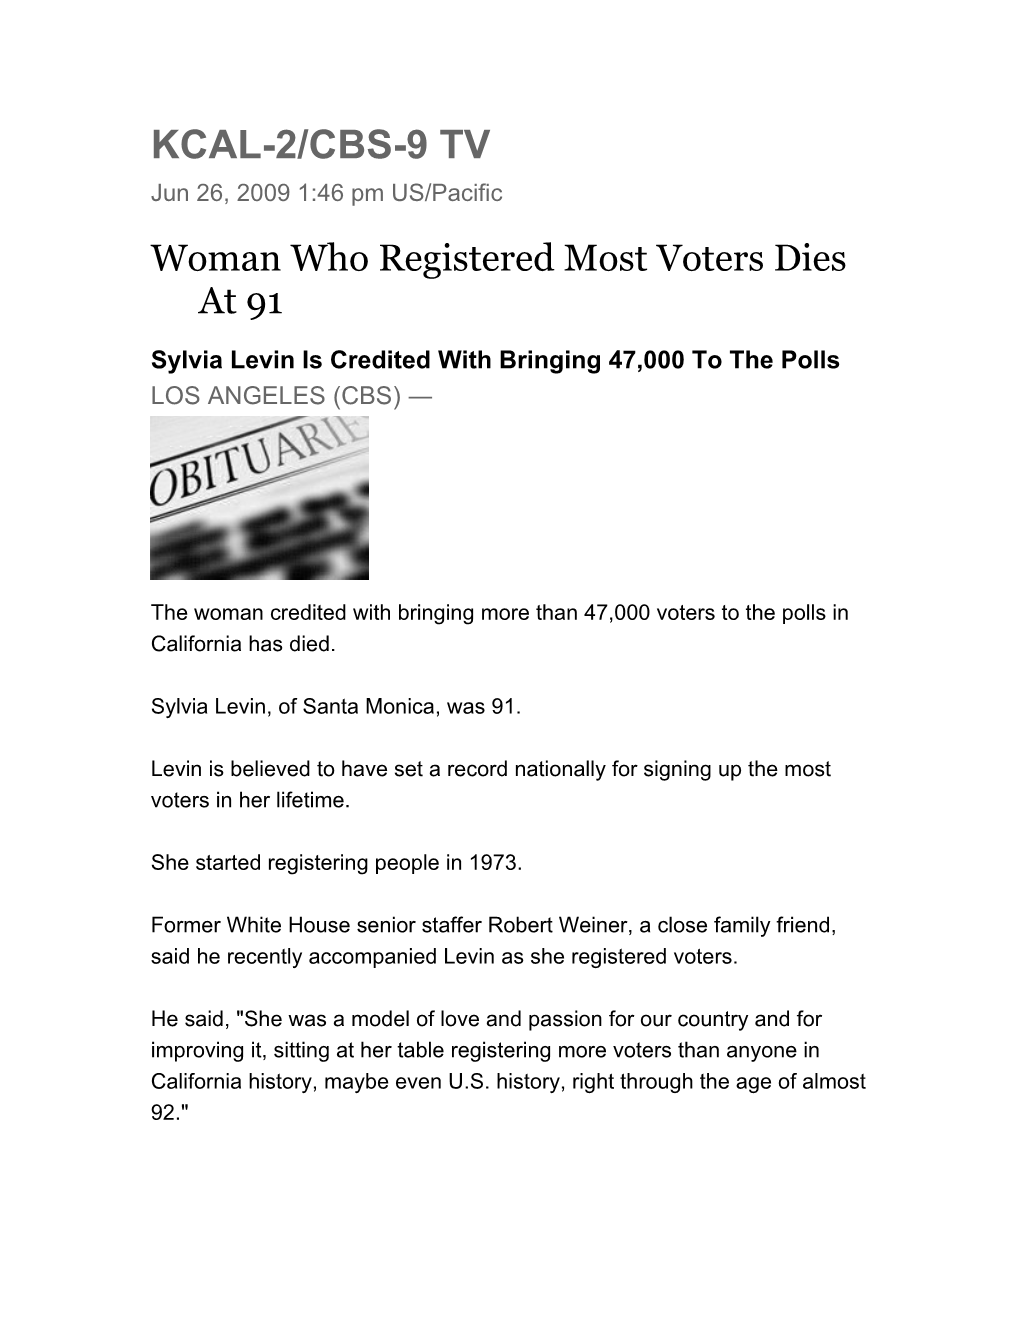 Woman Who Registered Most Voters Dies at 91